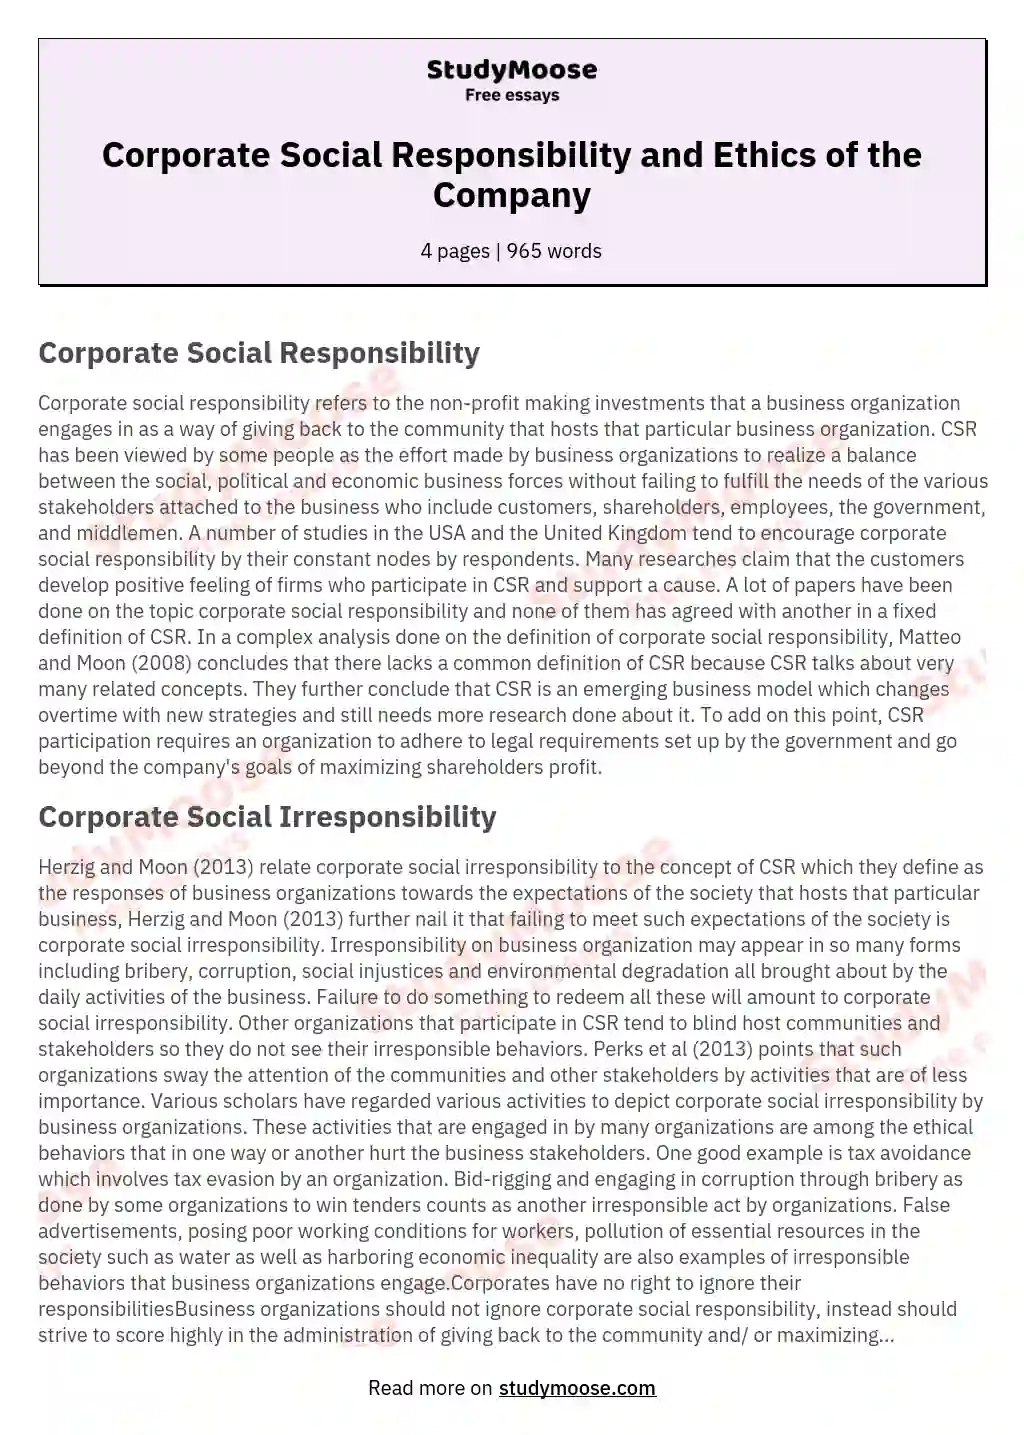 Corporate Social Responsibility and Ethics of the Company essay